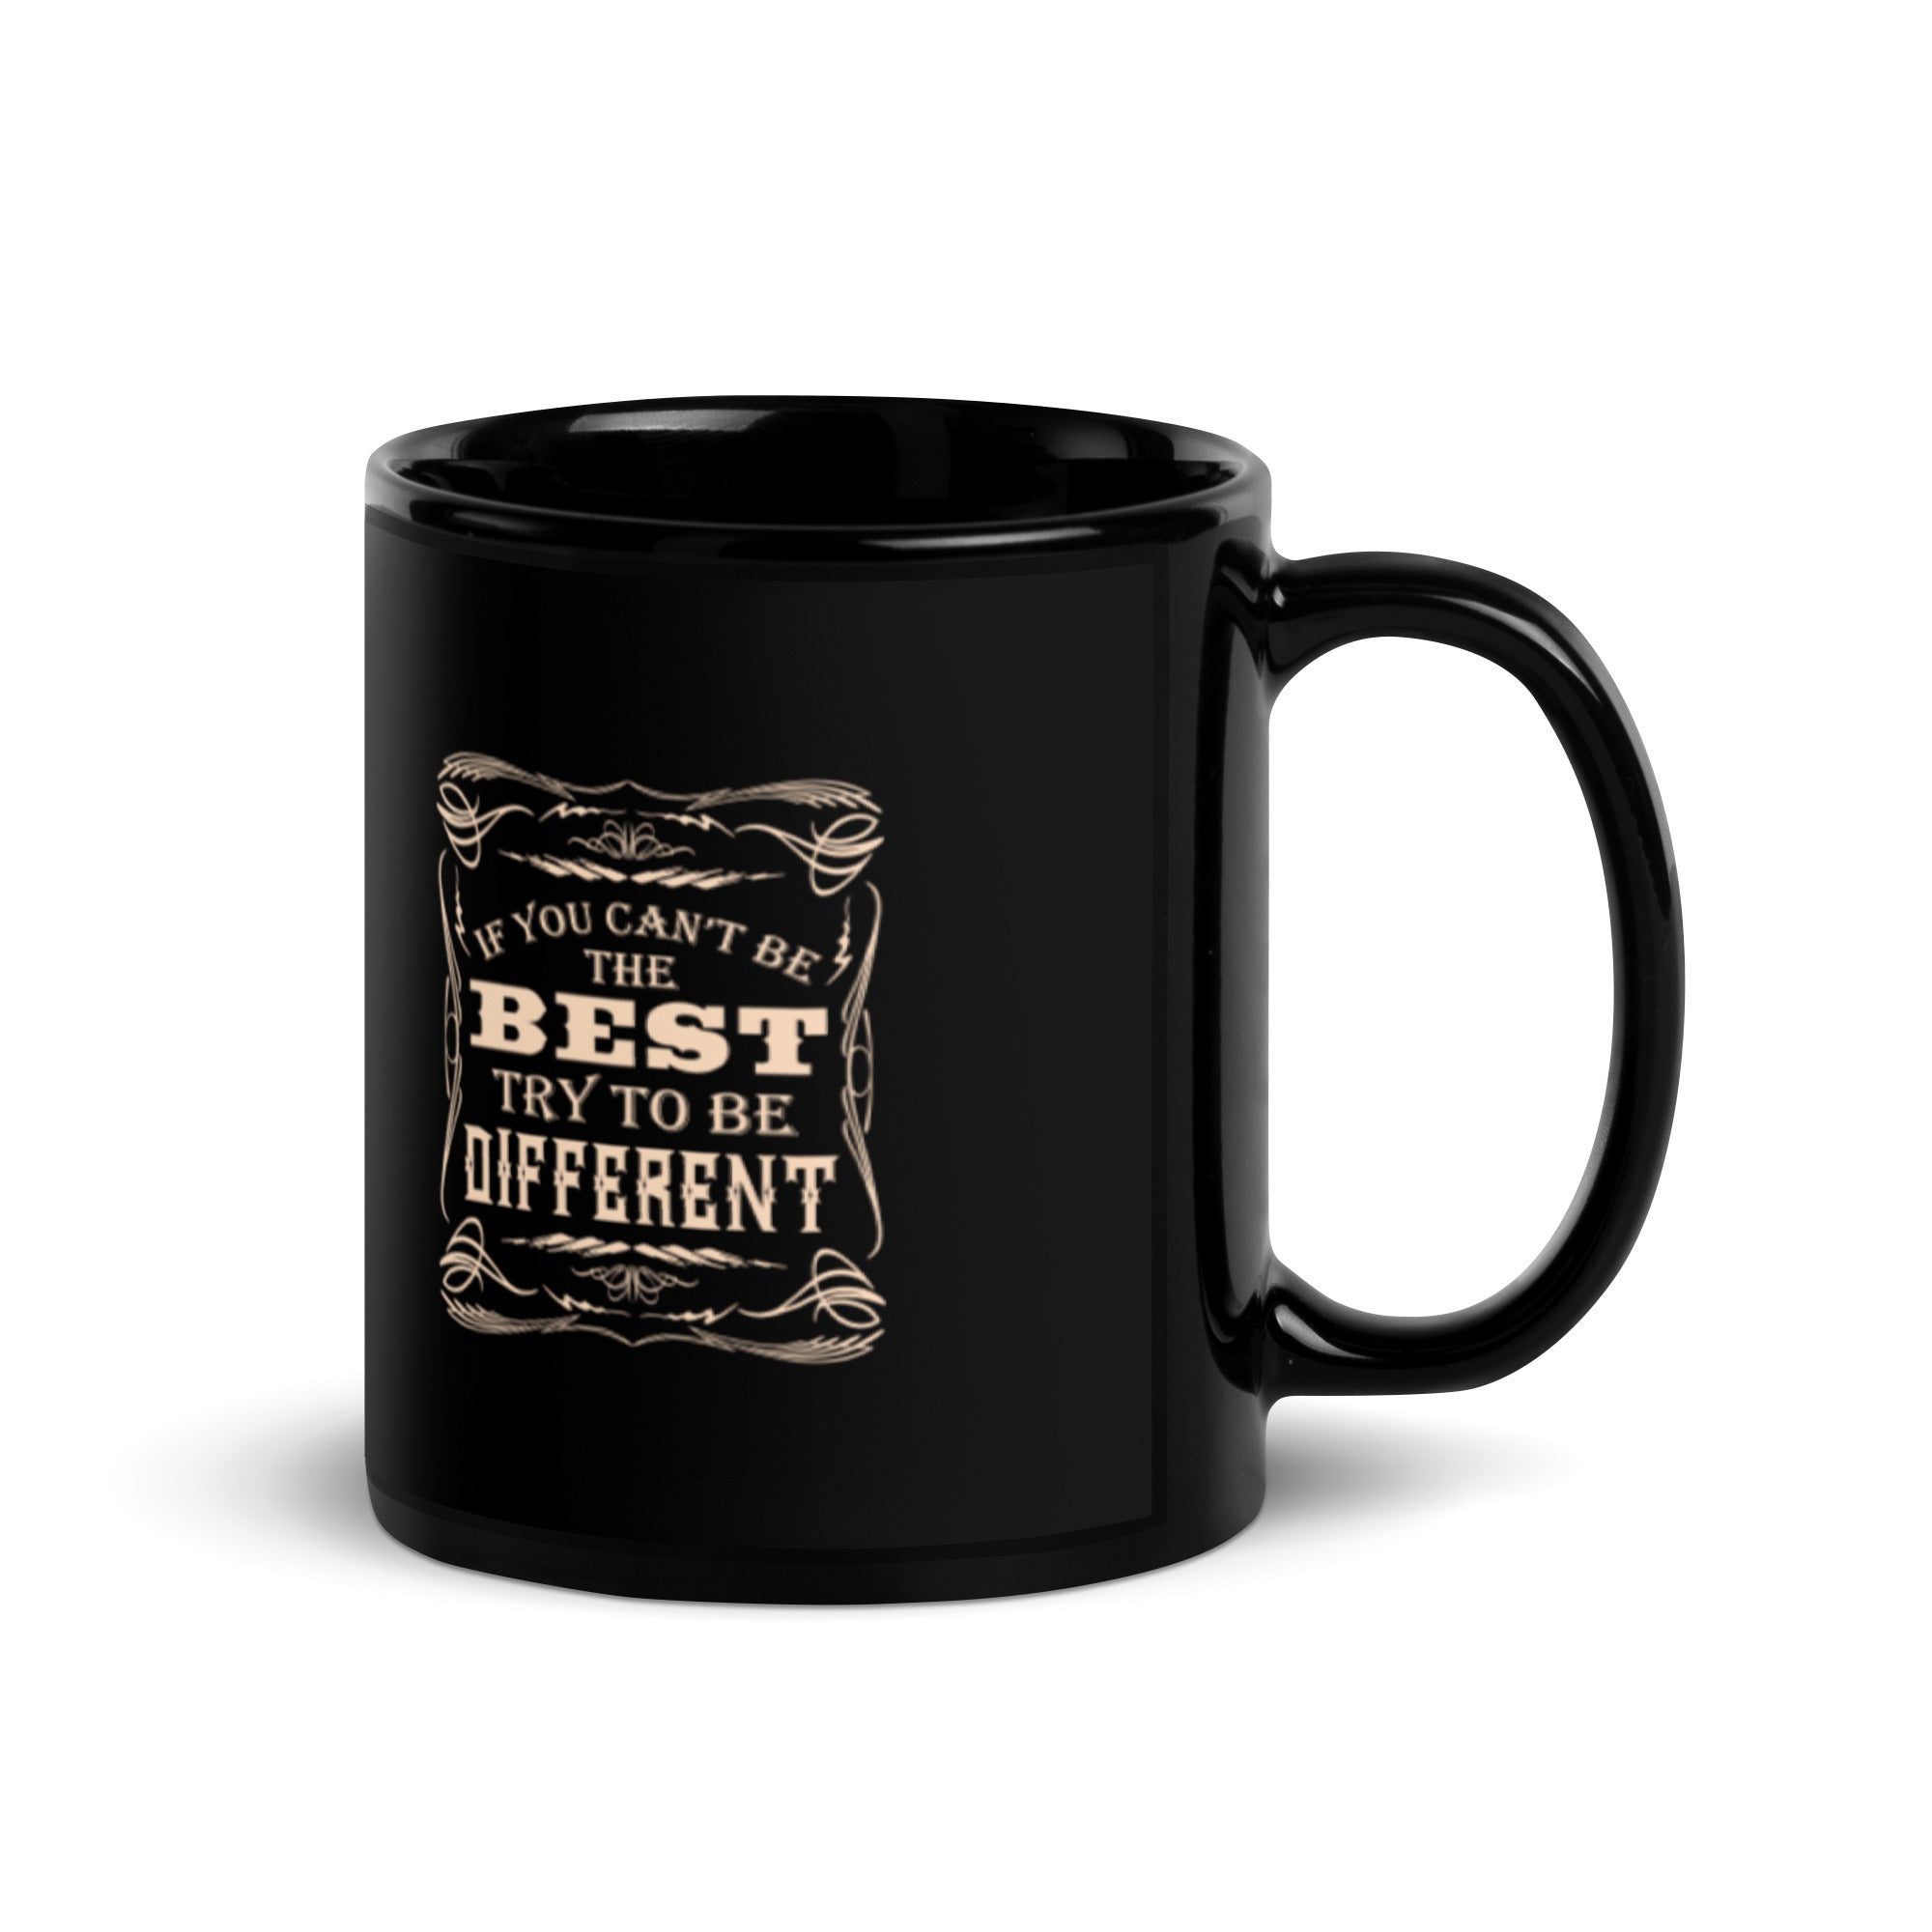 If You Can't Be The Best Try To Be Different - Black Glossy Mug